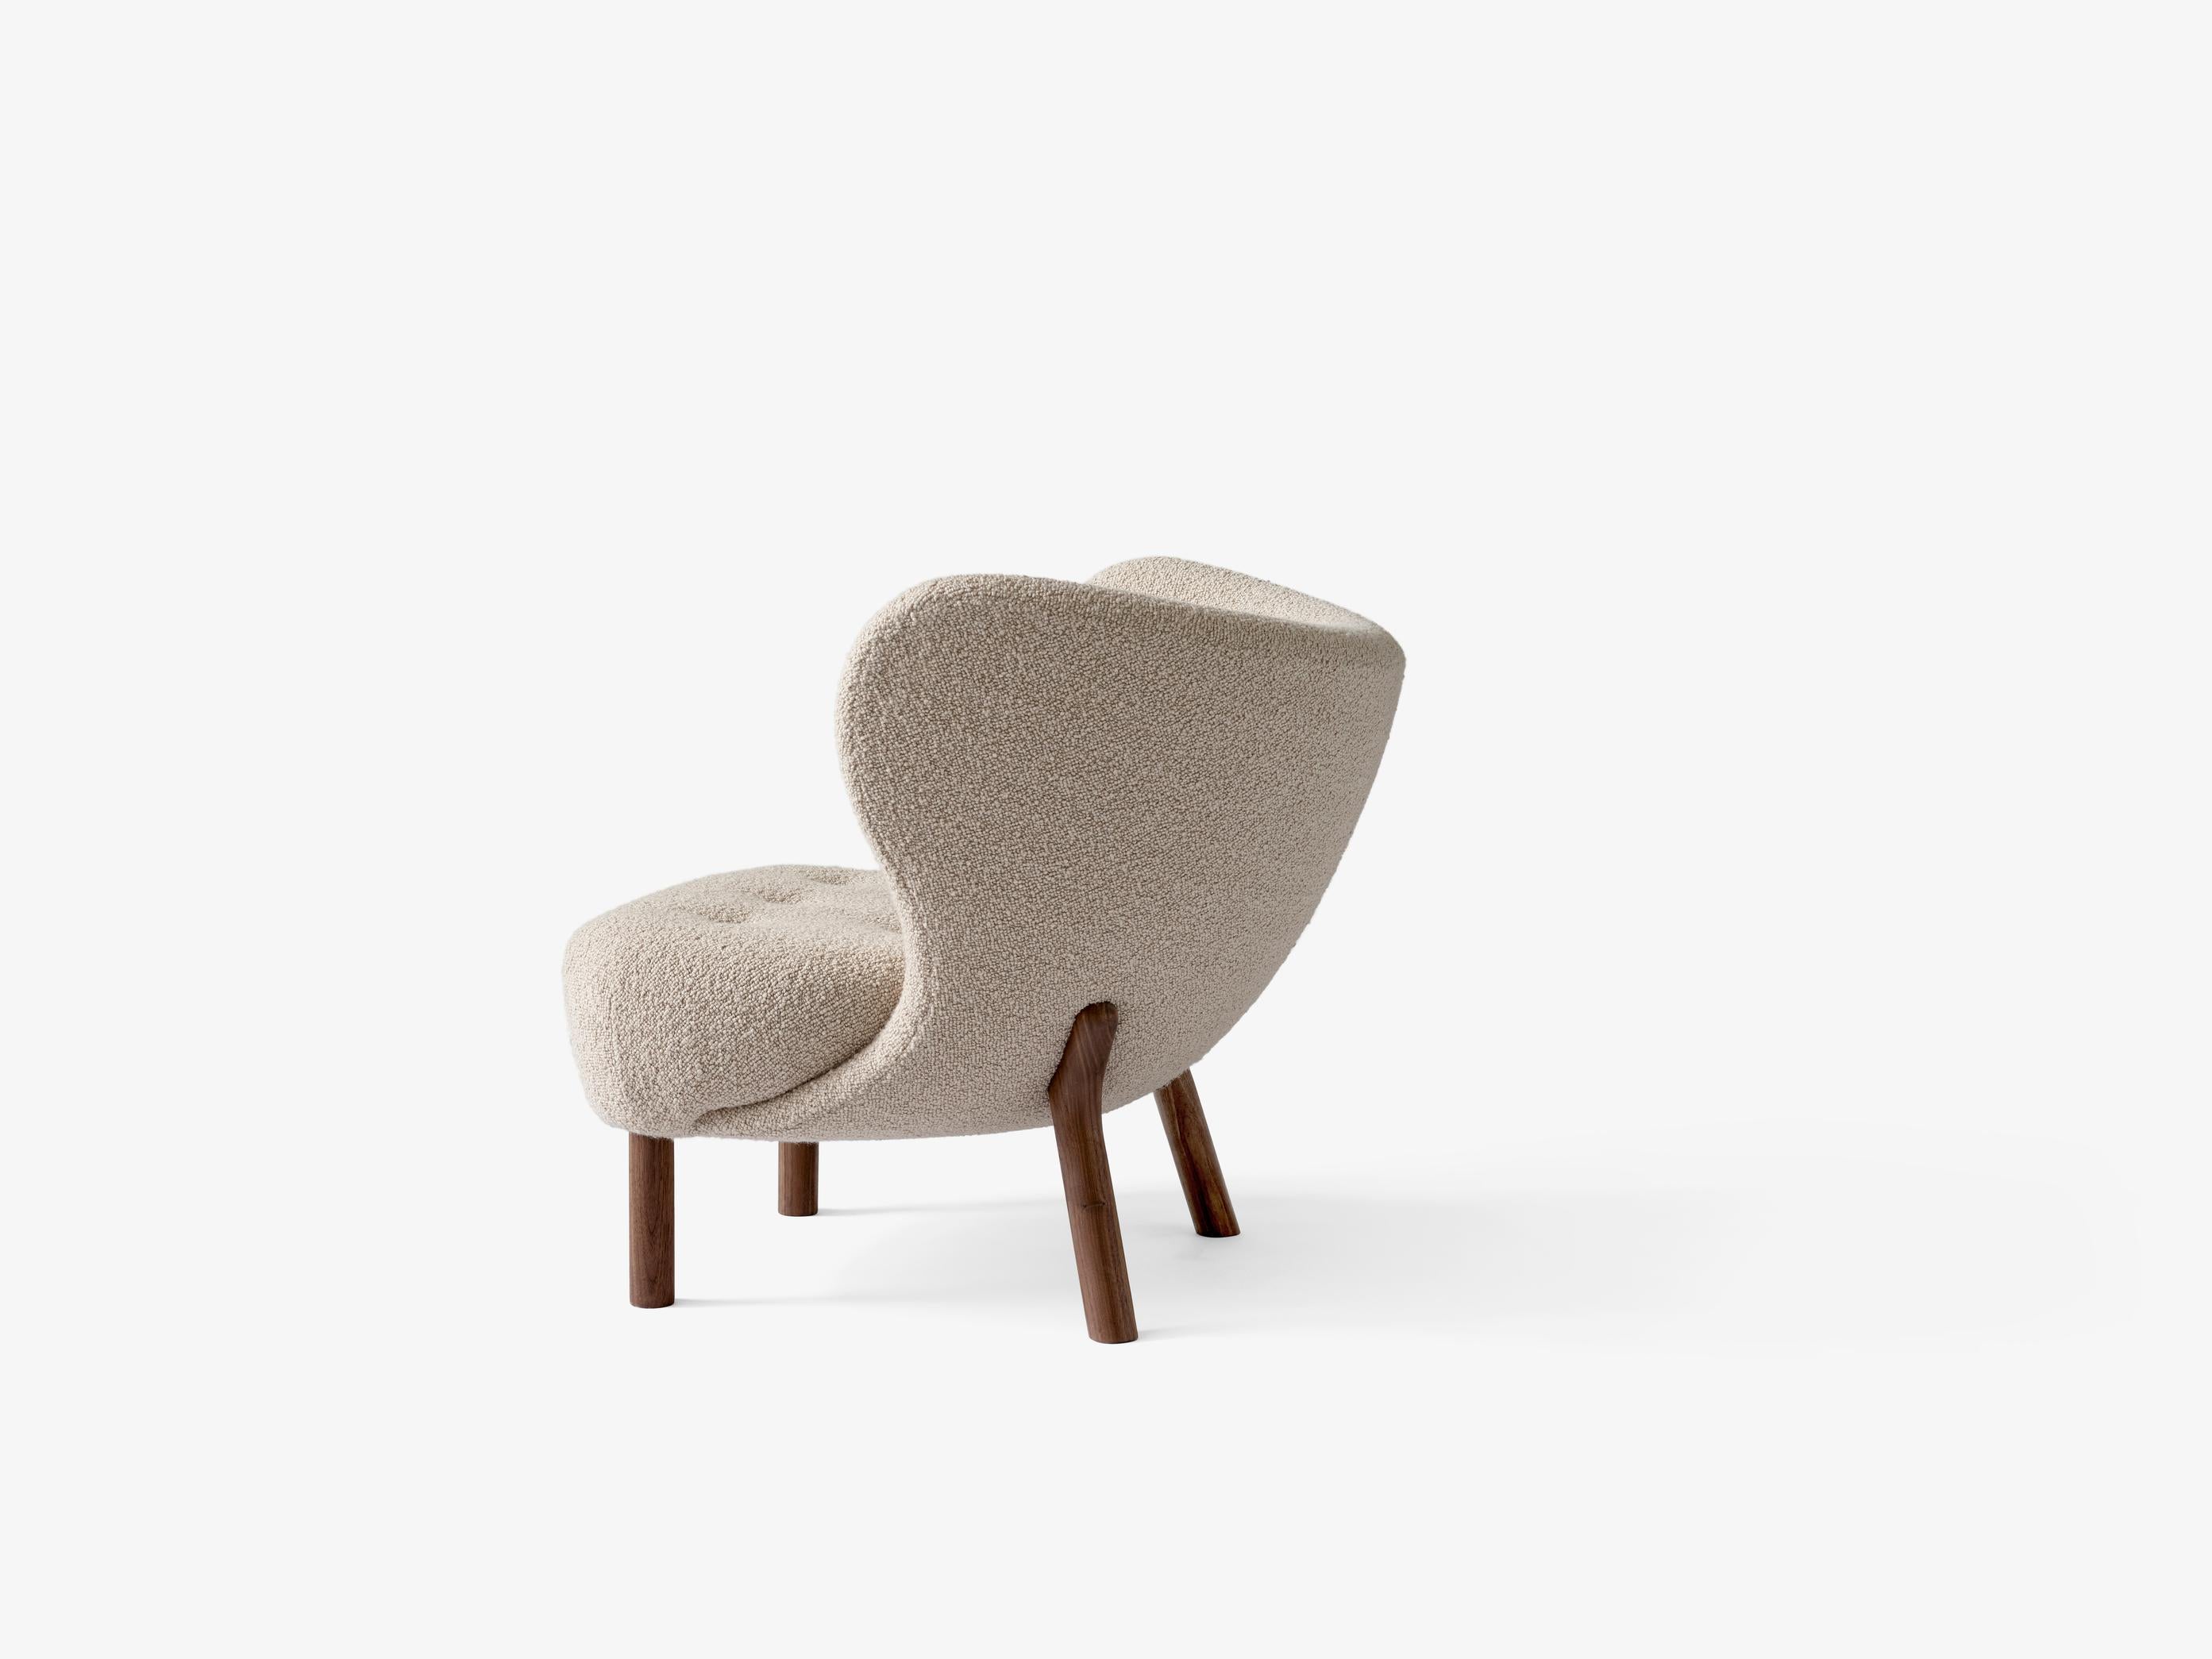 Scandinave moderne Little Petra VB1 Lounge Chair in Walnut & C.O.M 'Customer's Own Material' for AT&T. en vente